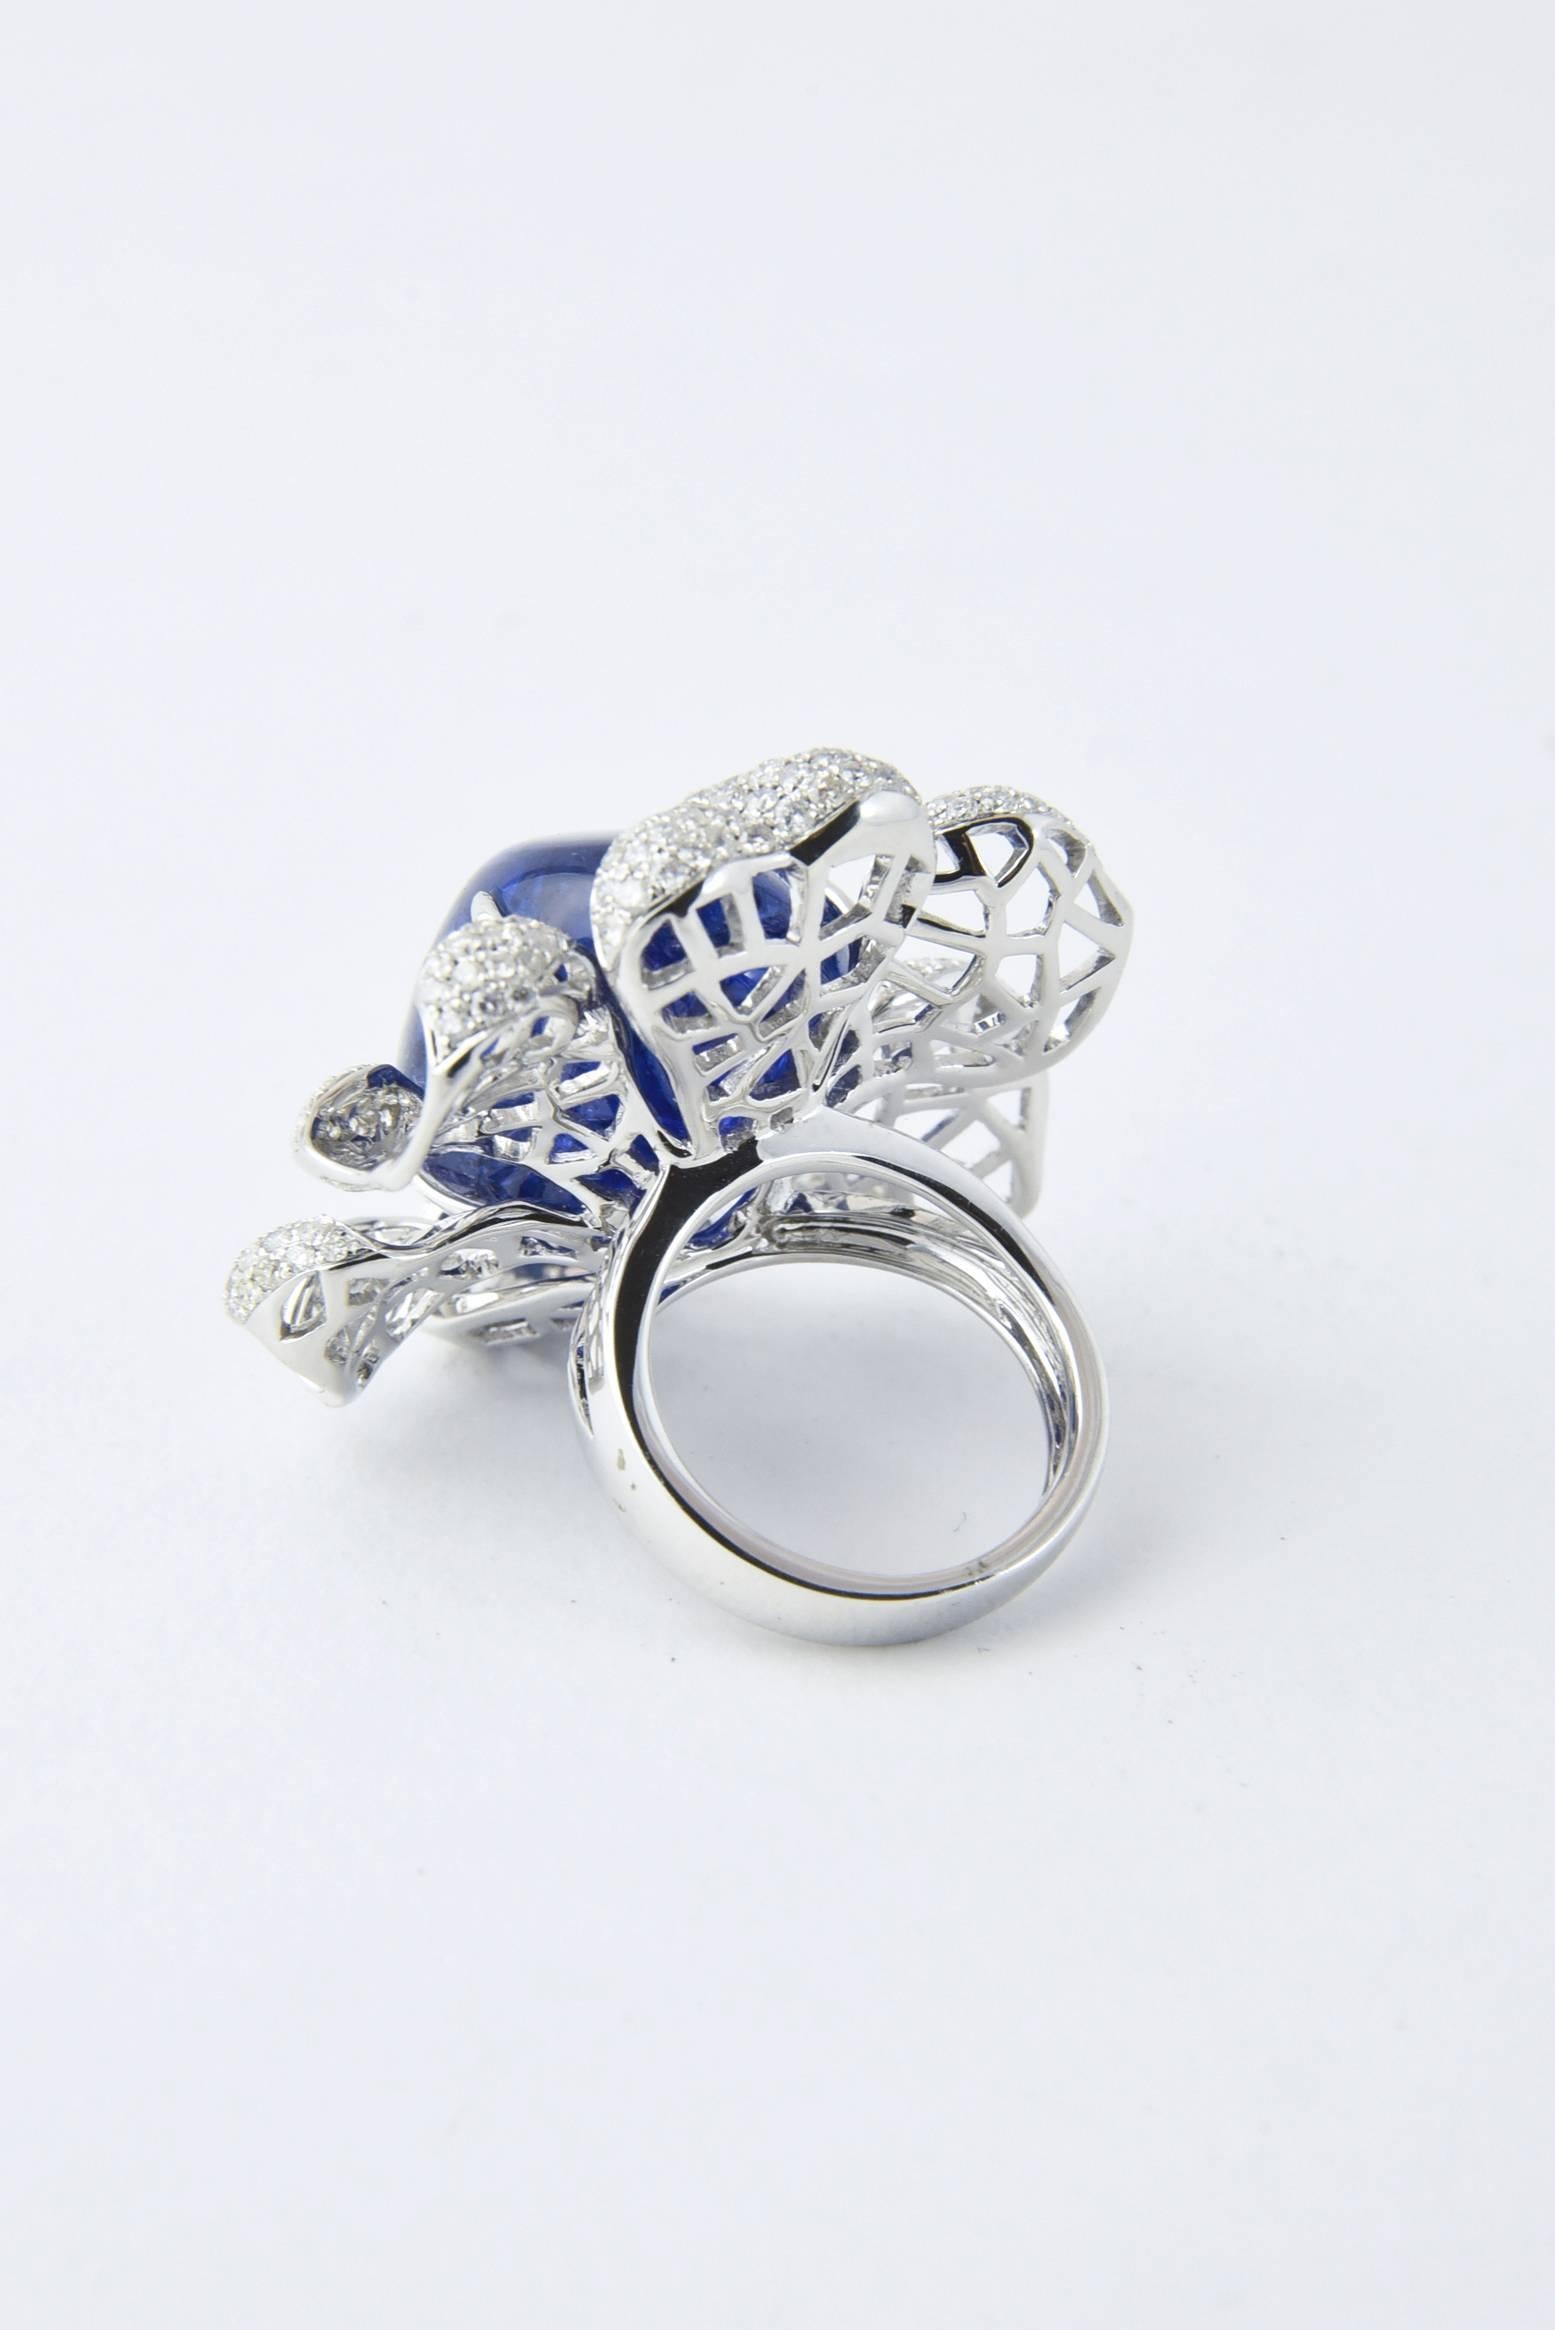 Modern Large Tanzanite Diamond Gold Flower Statement Ring In Excellent Condition For Sale In Miami Beach, FL